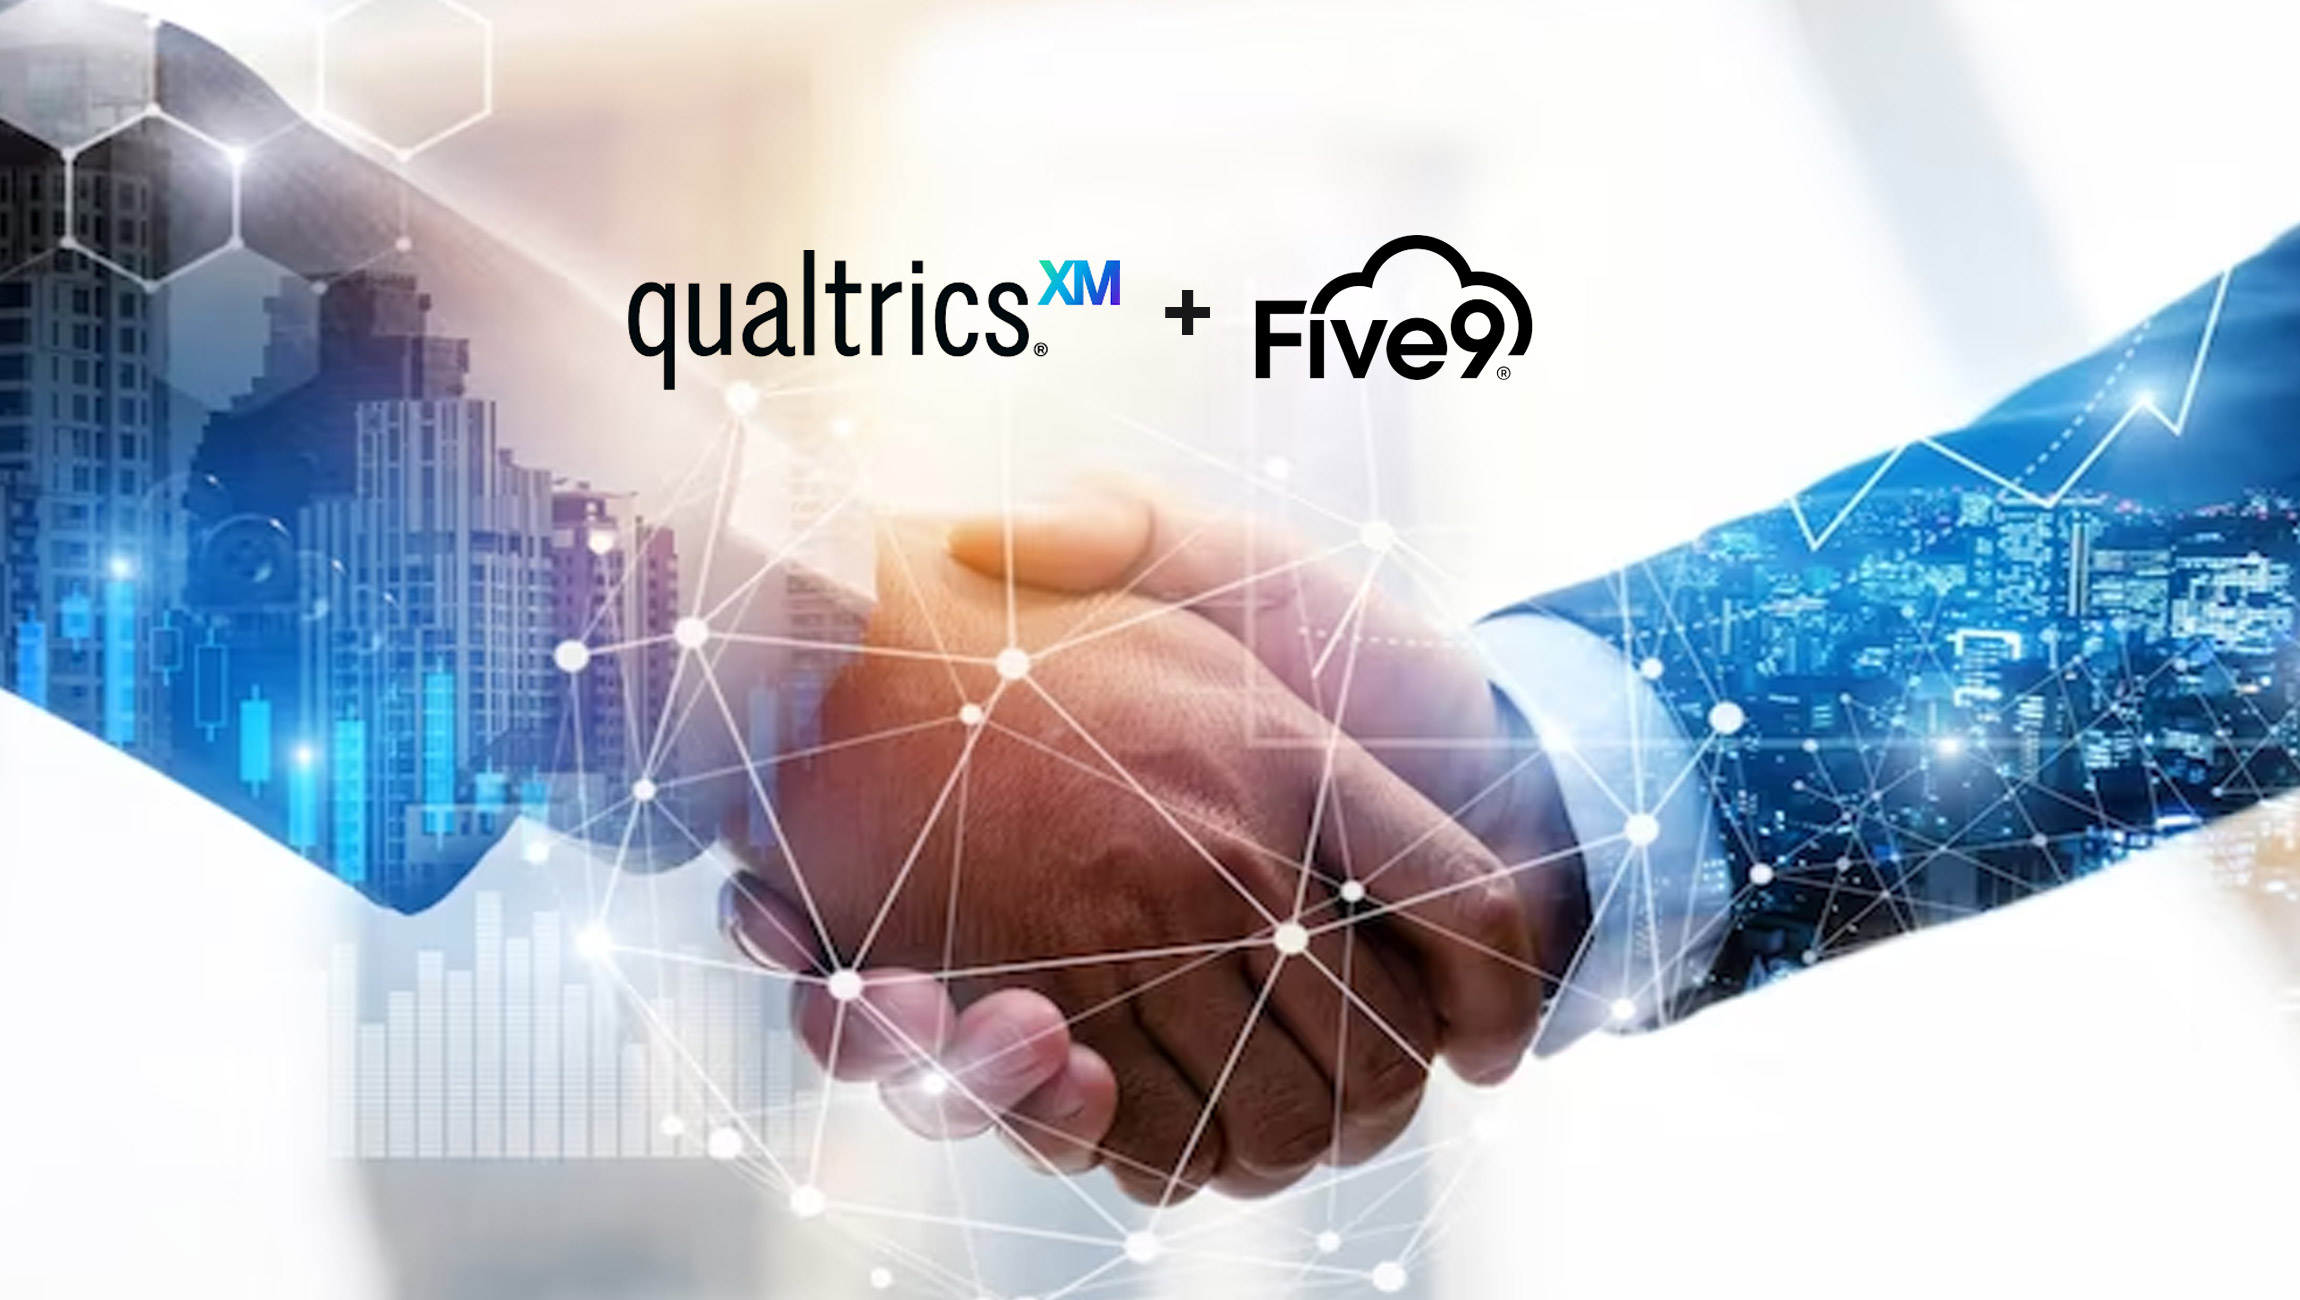 Qualtrics and Five9 Partner to Improve the Contact Center Experience for Agents and Customers